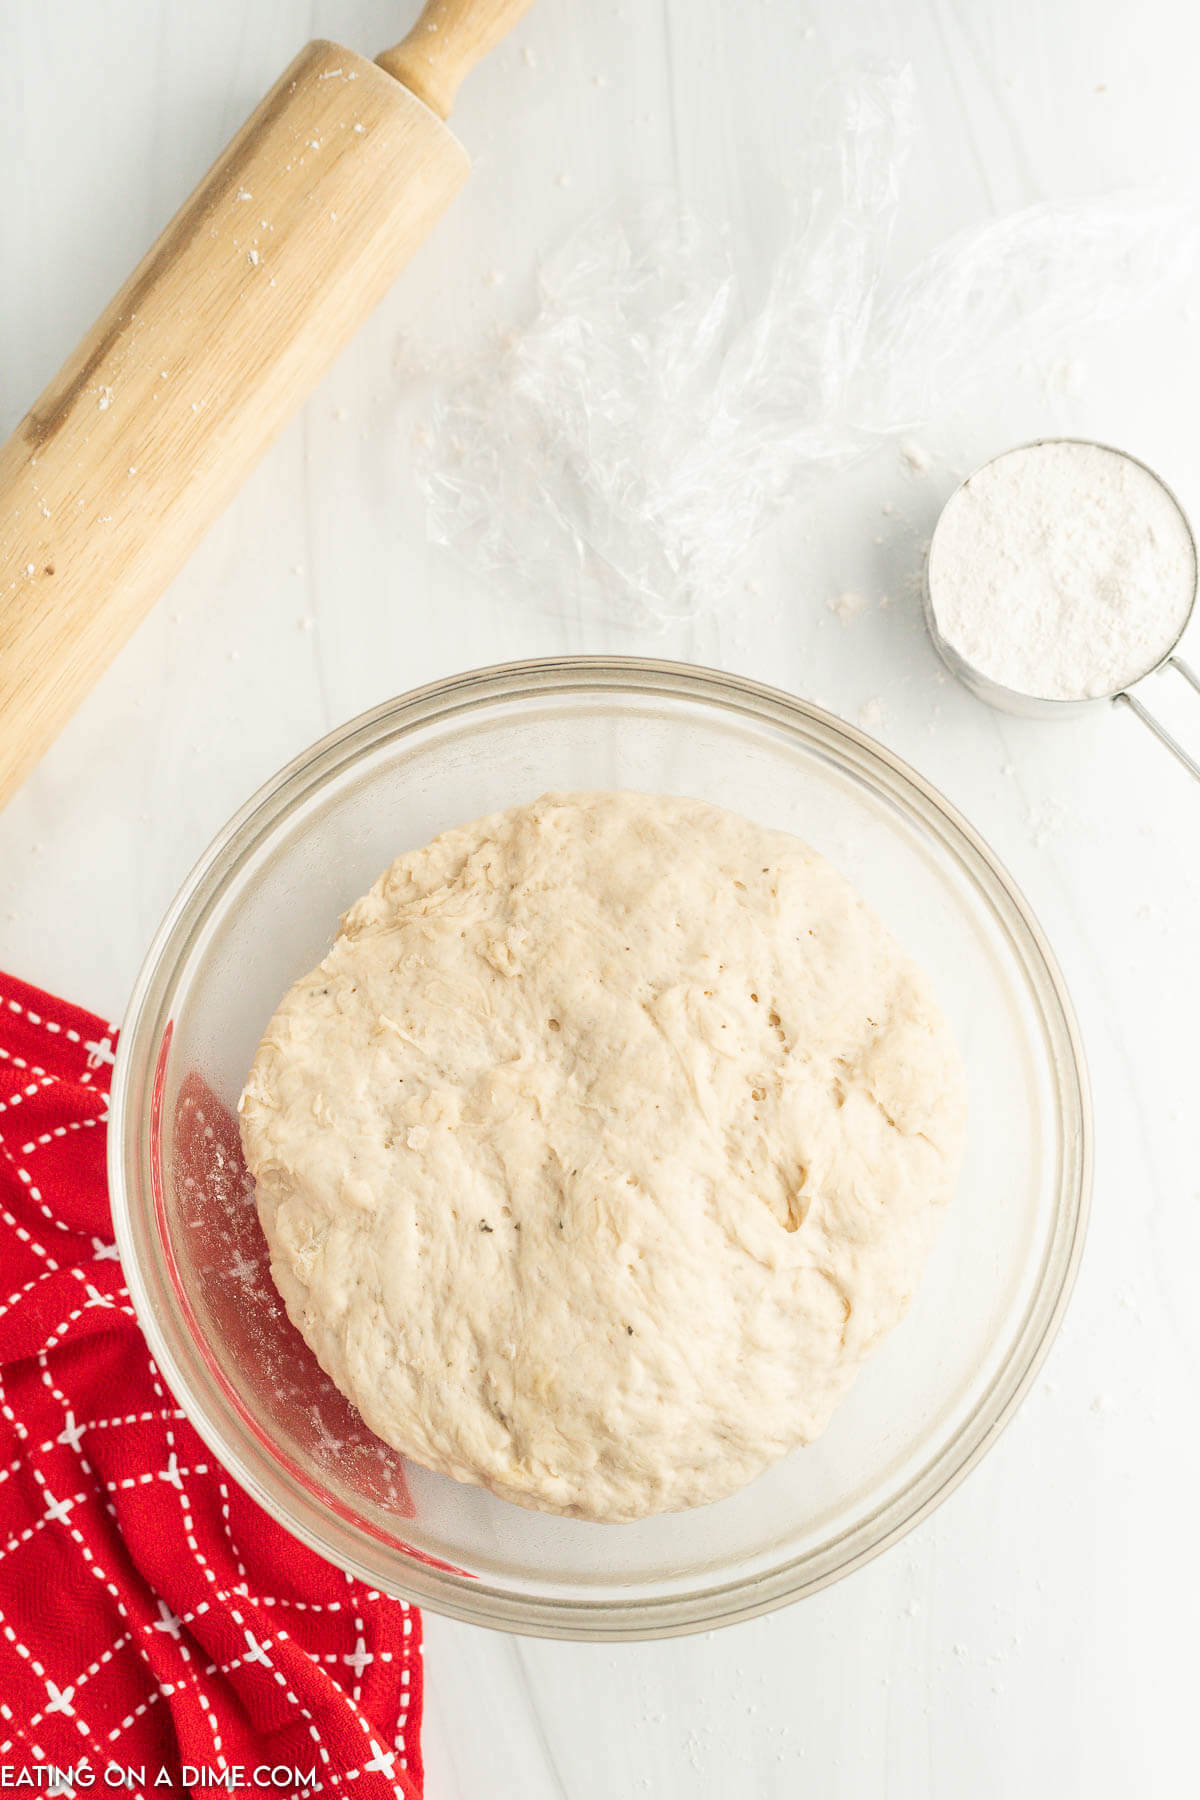 Allow the pizza dough to rise in a bowl